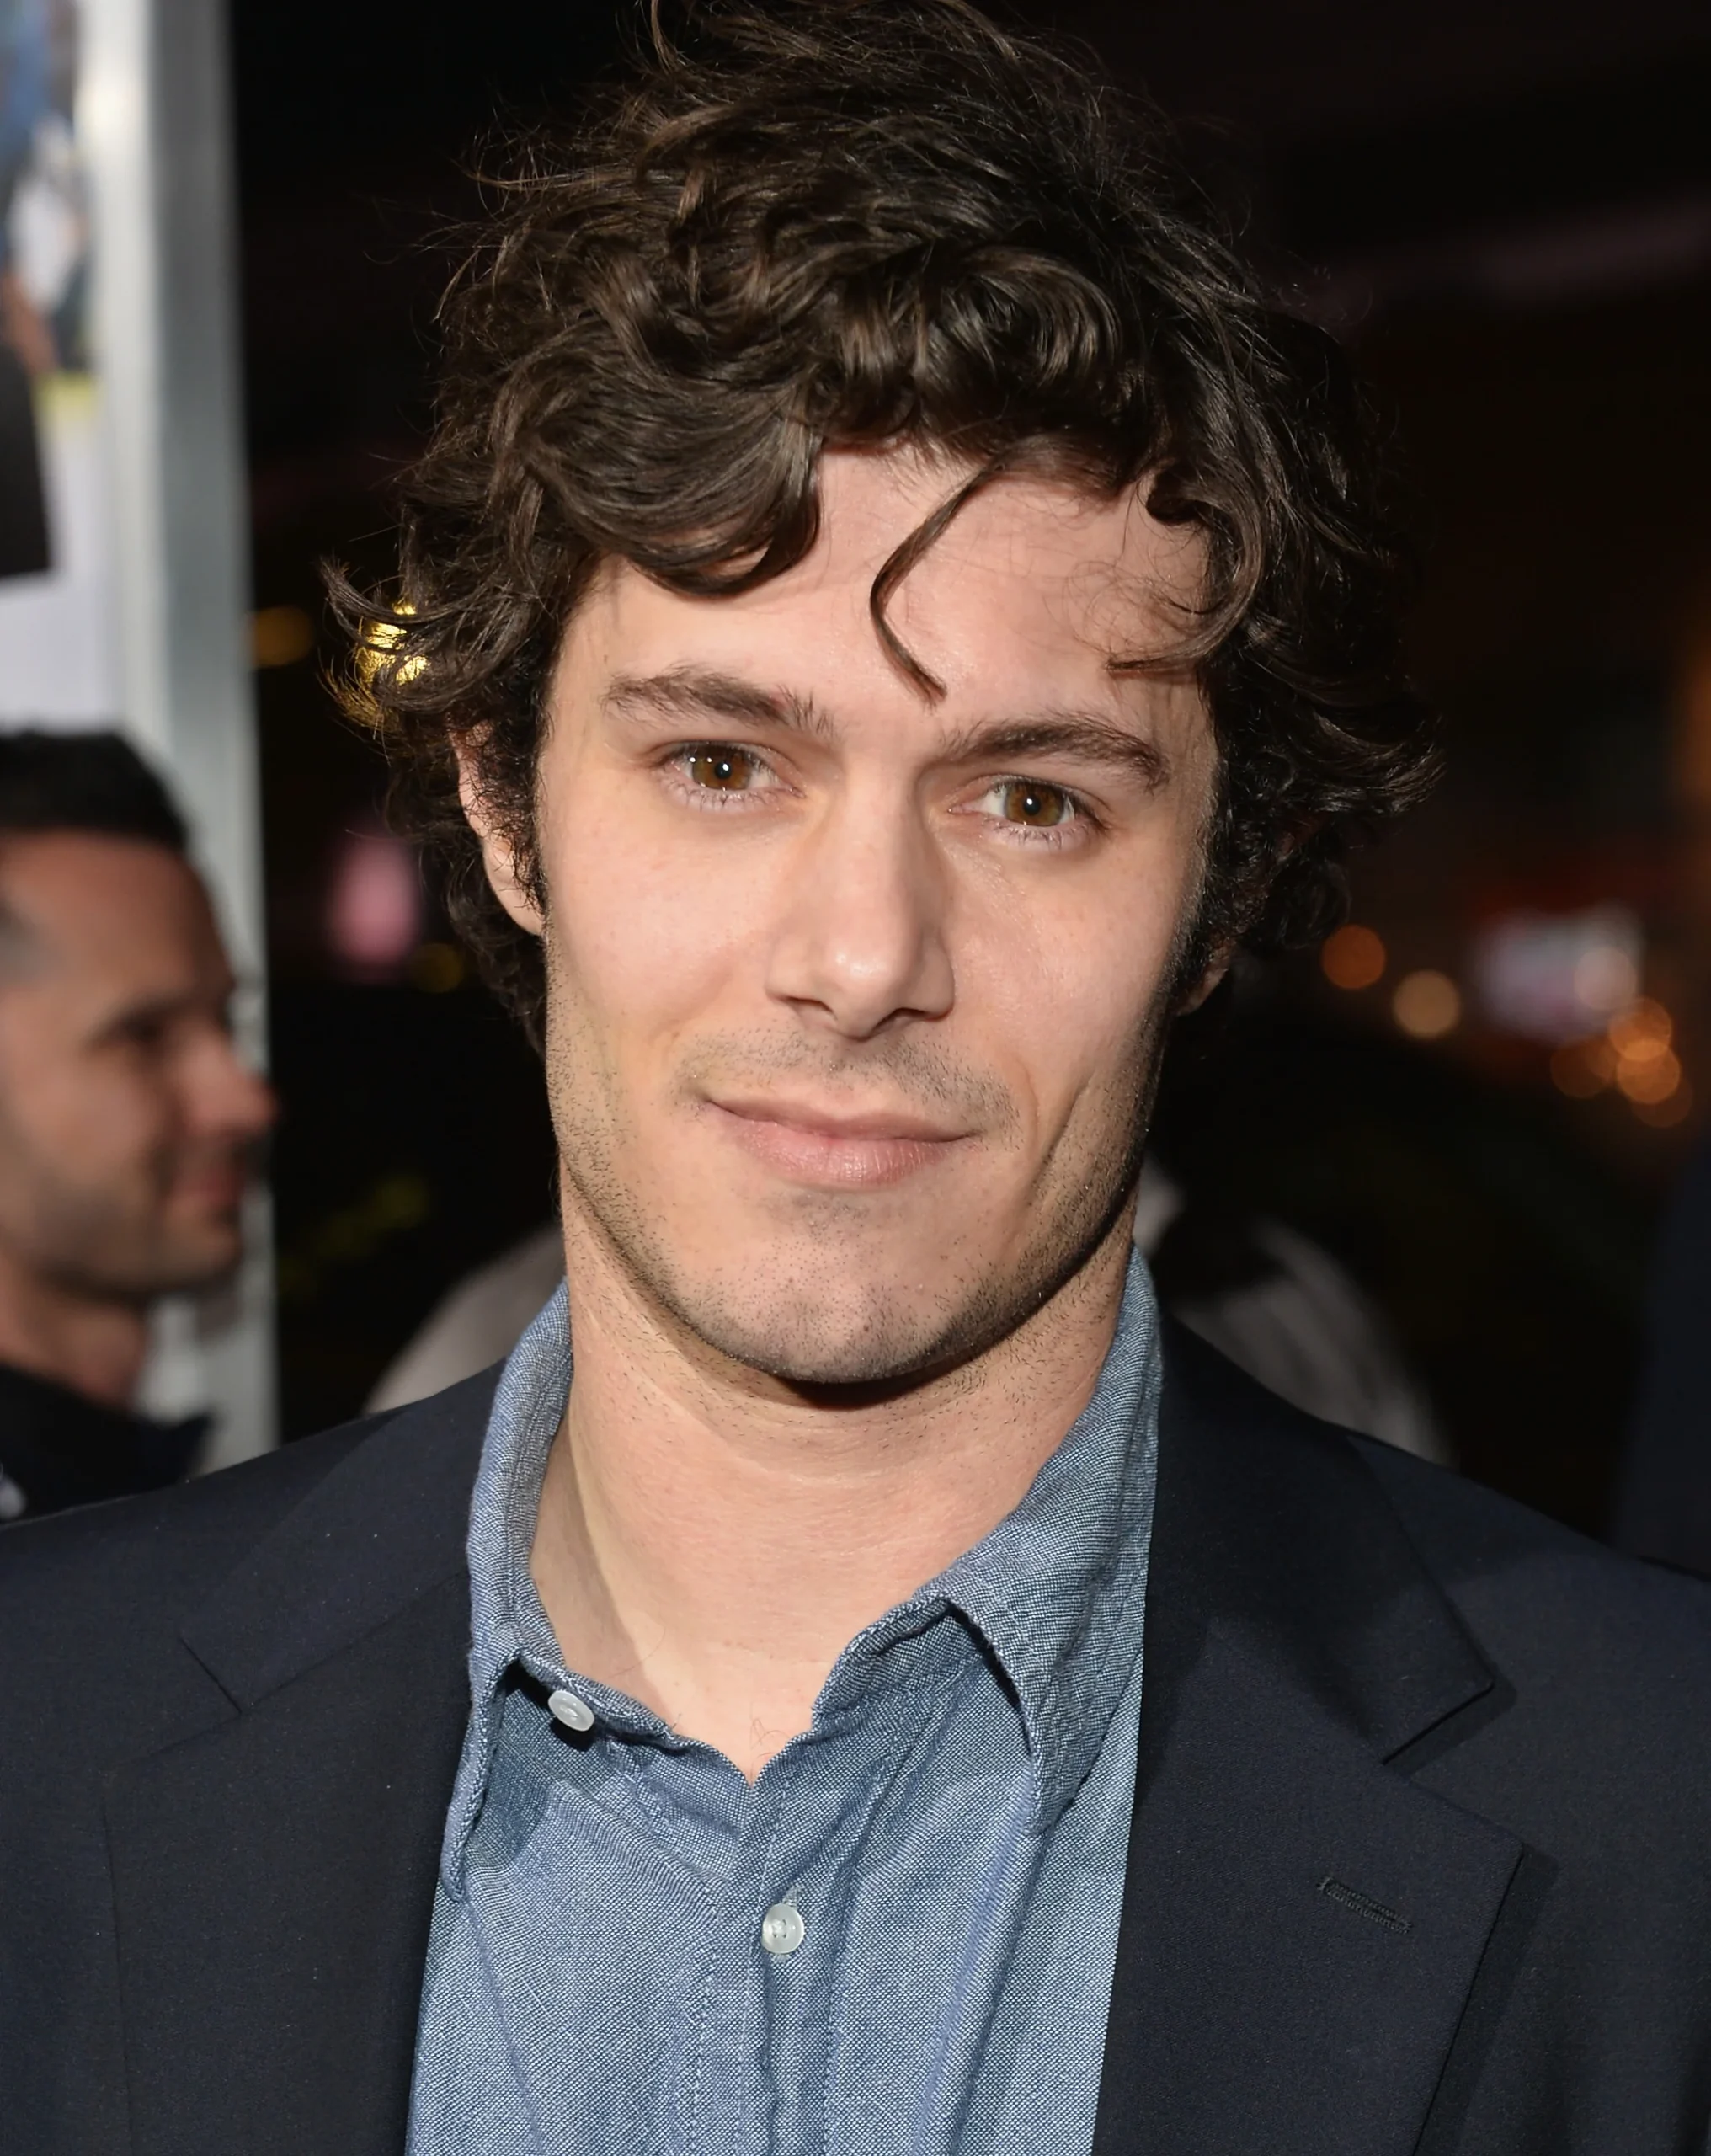 Adam Brody: The Charming Actor Who Stole Our Hearts